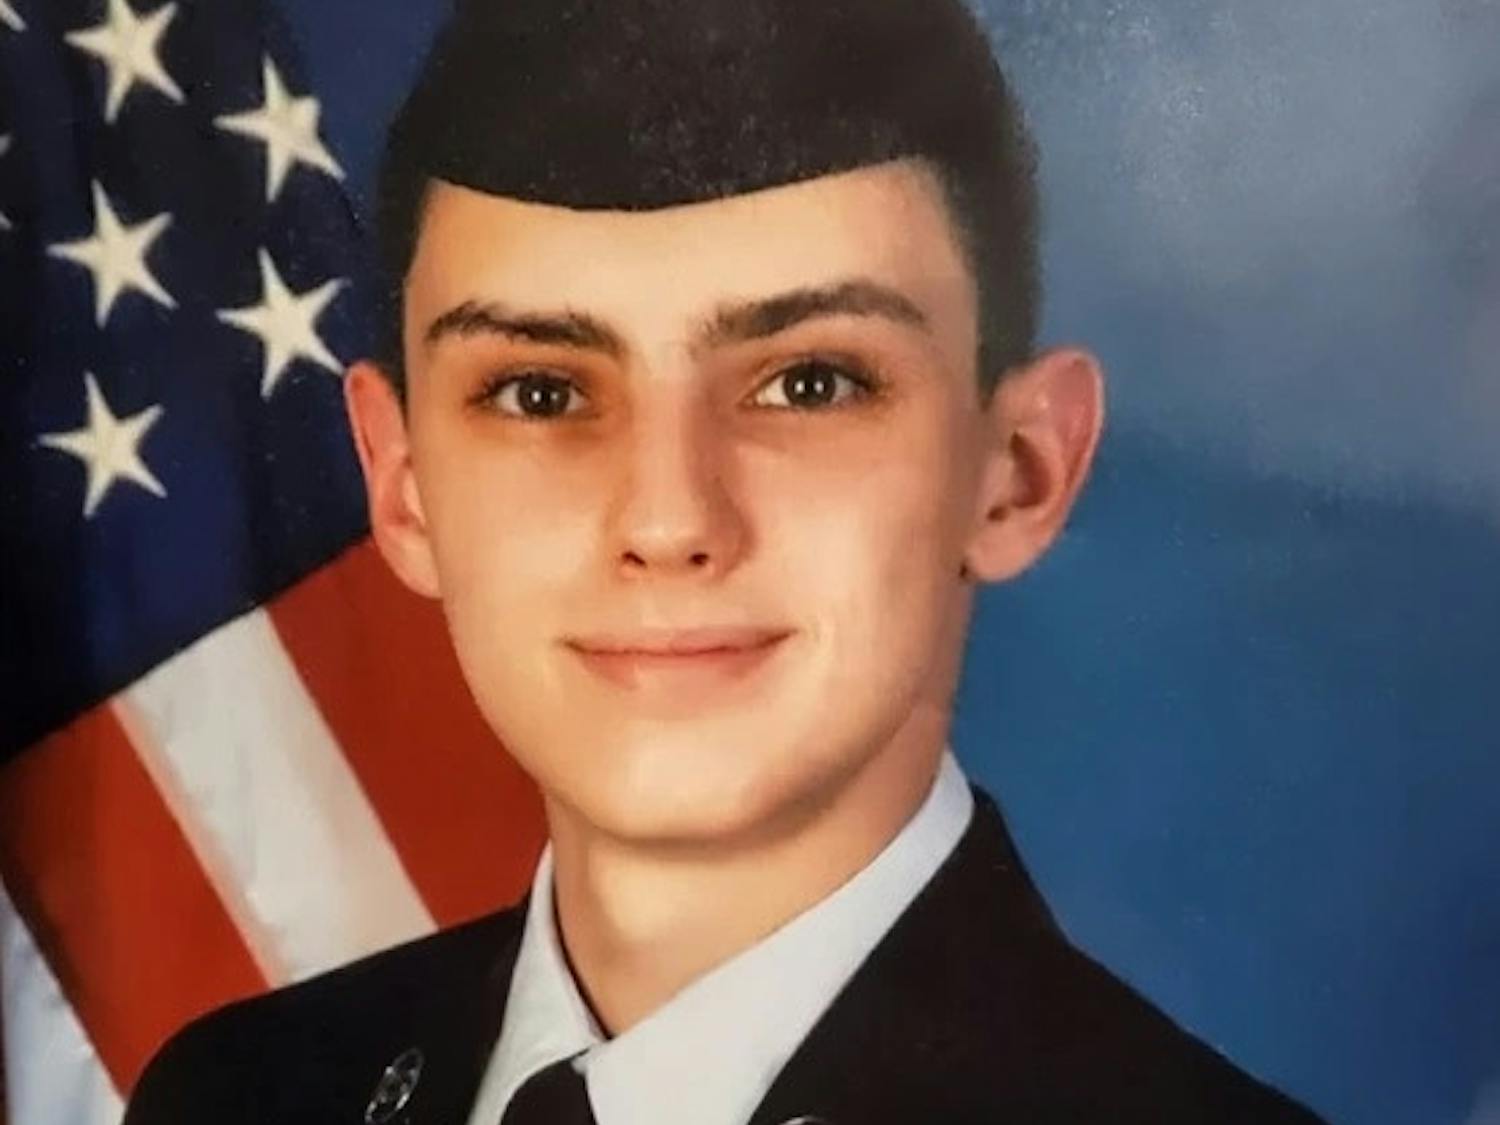 21-year-old U.S. air national guardsman, Jack Douglas Teixeira, was identified as the sole suspect in leaking Pentagon documents and was taken into custody by the FBI on April 13 (Photo courtesy of Wikimedia Commons/“Jack Teixeira” by U.S. Air National Guard. After August 2019). 